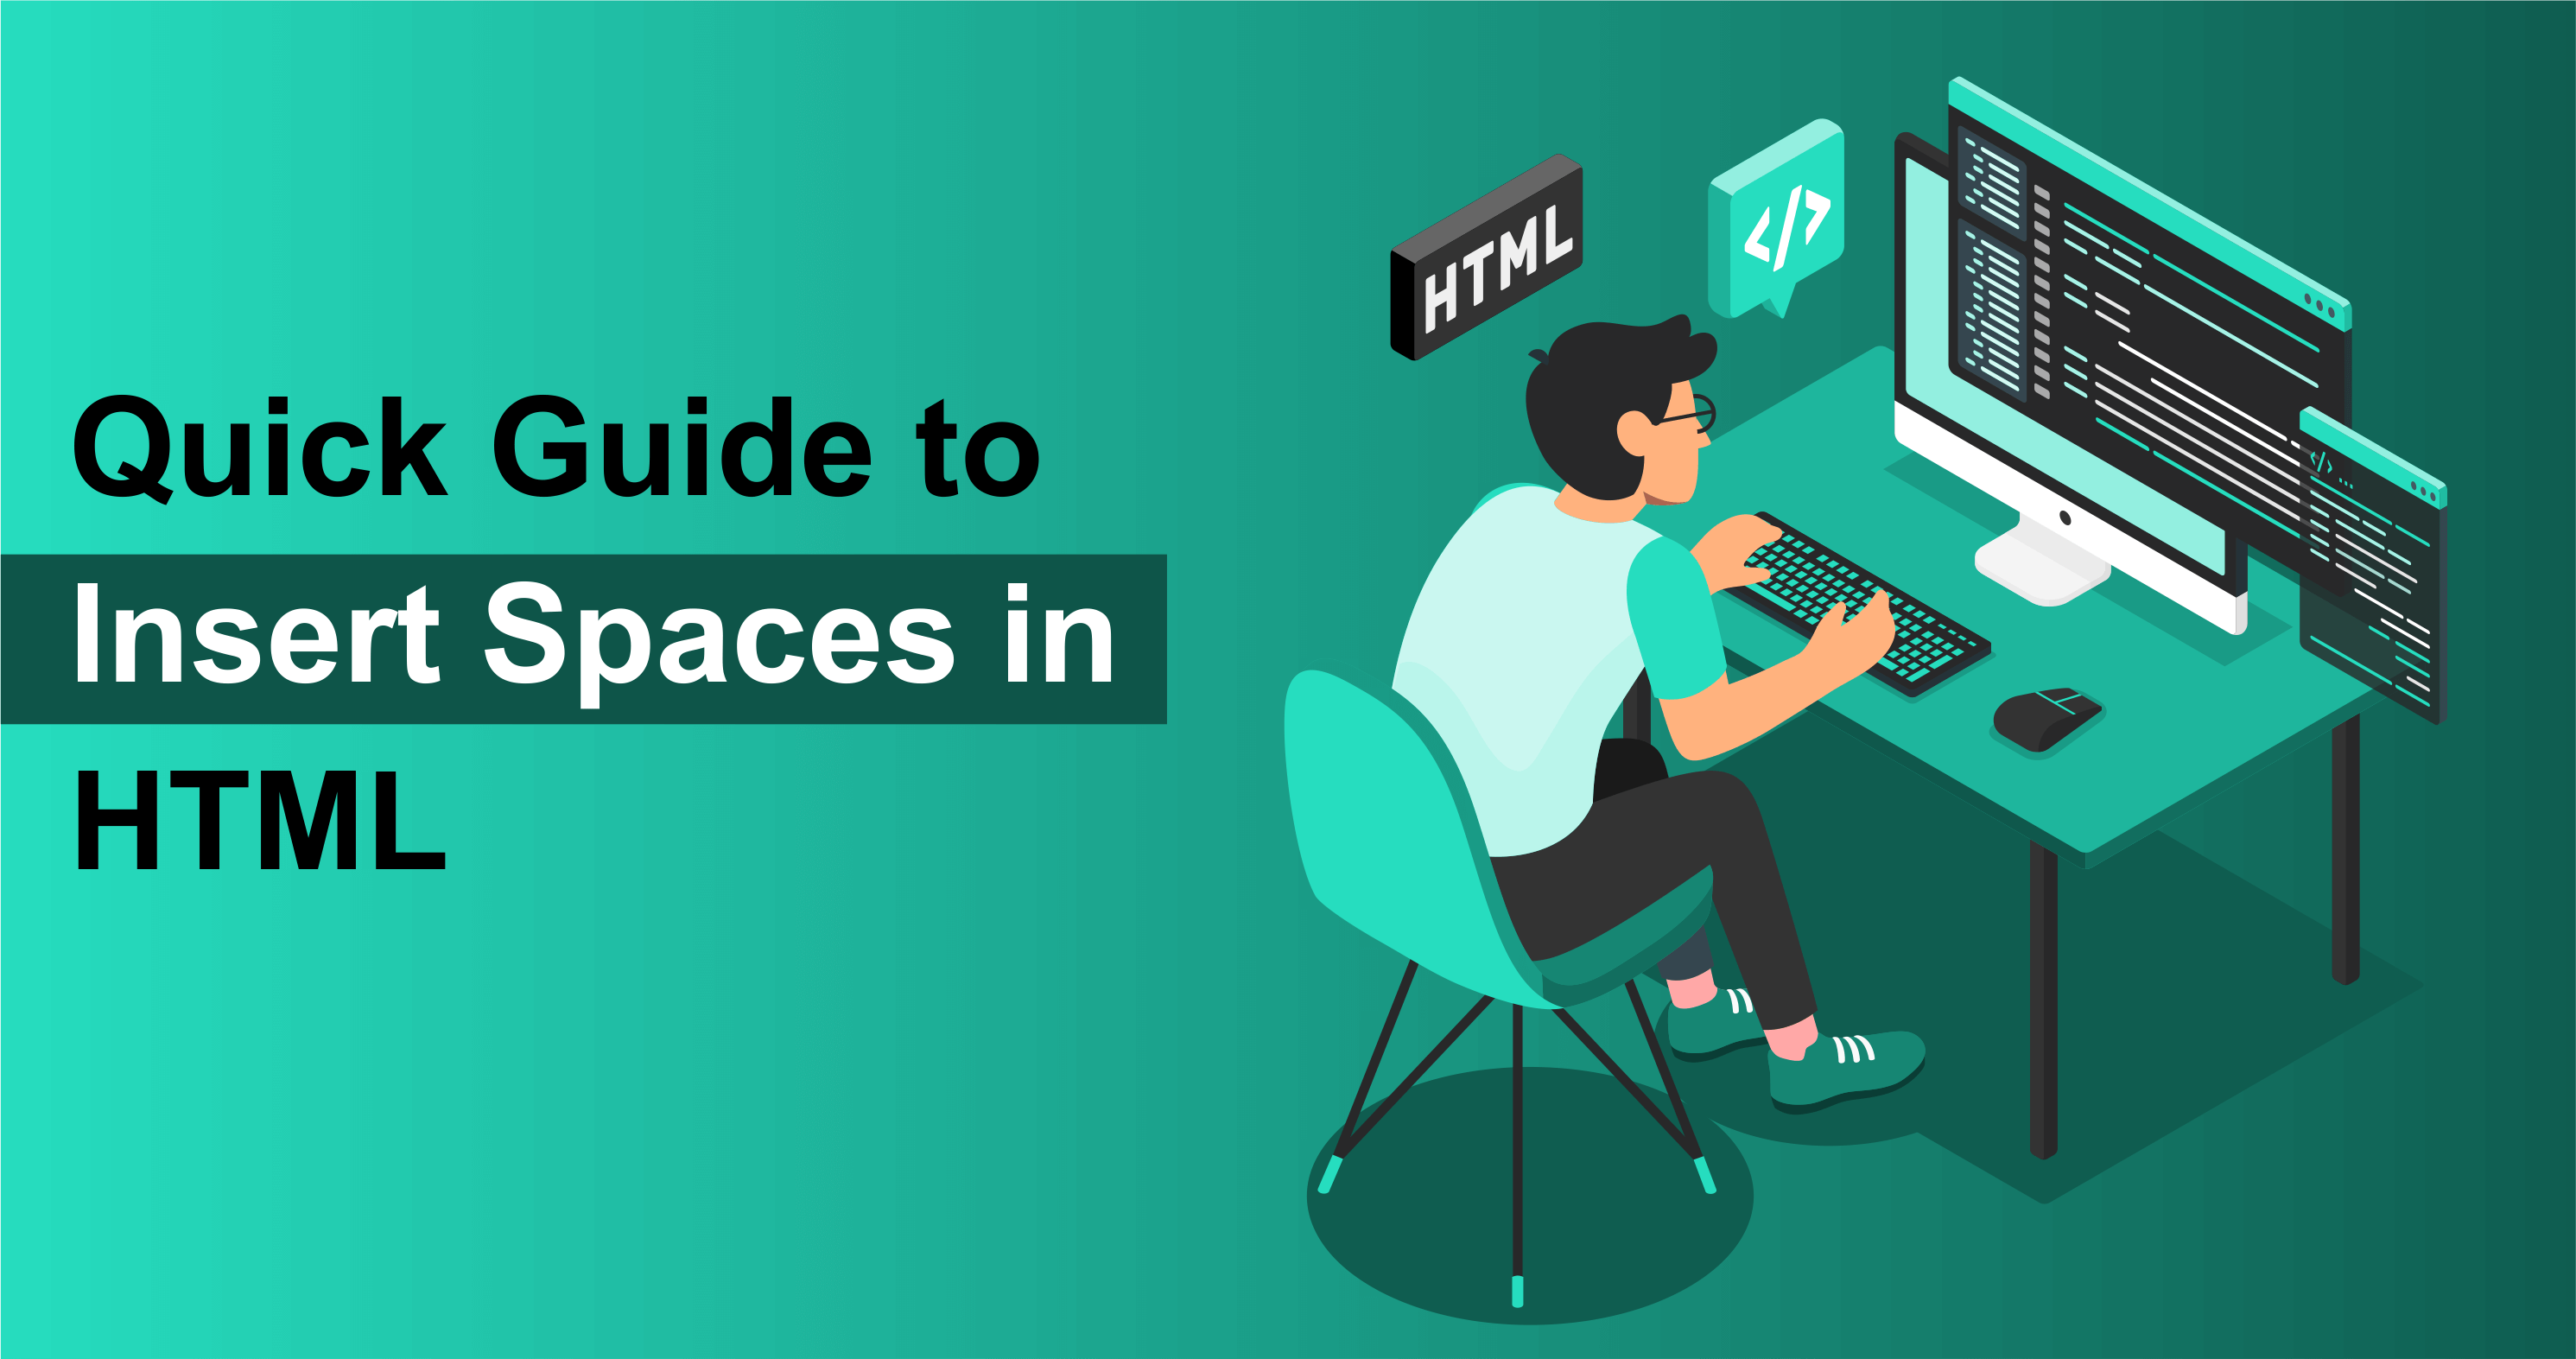 Quick Guide to Insert Spaces in HTML